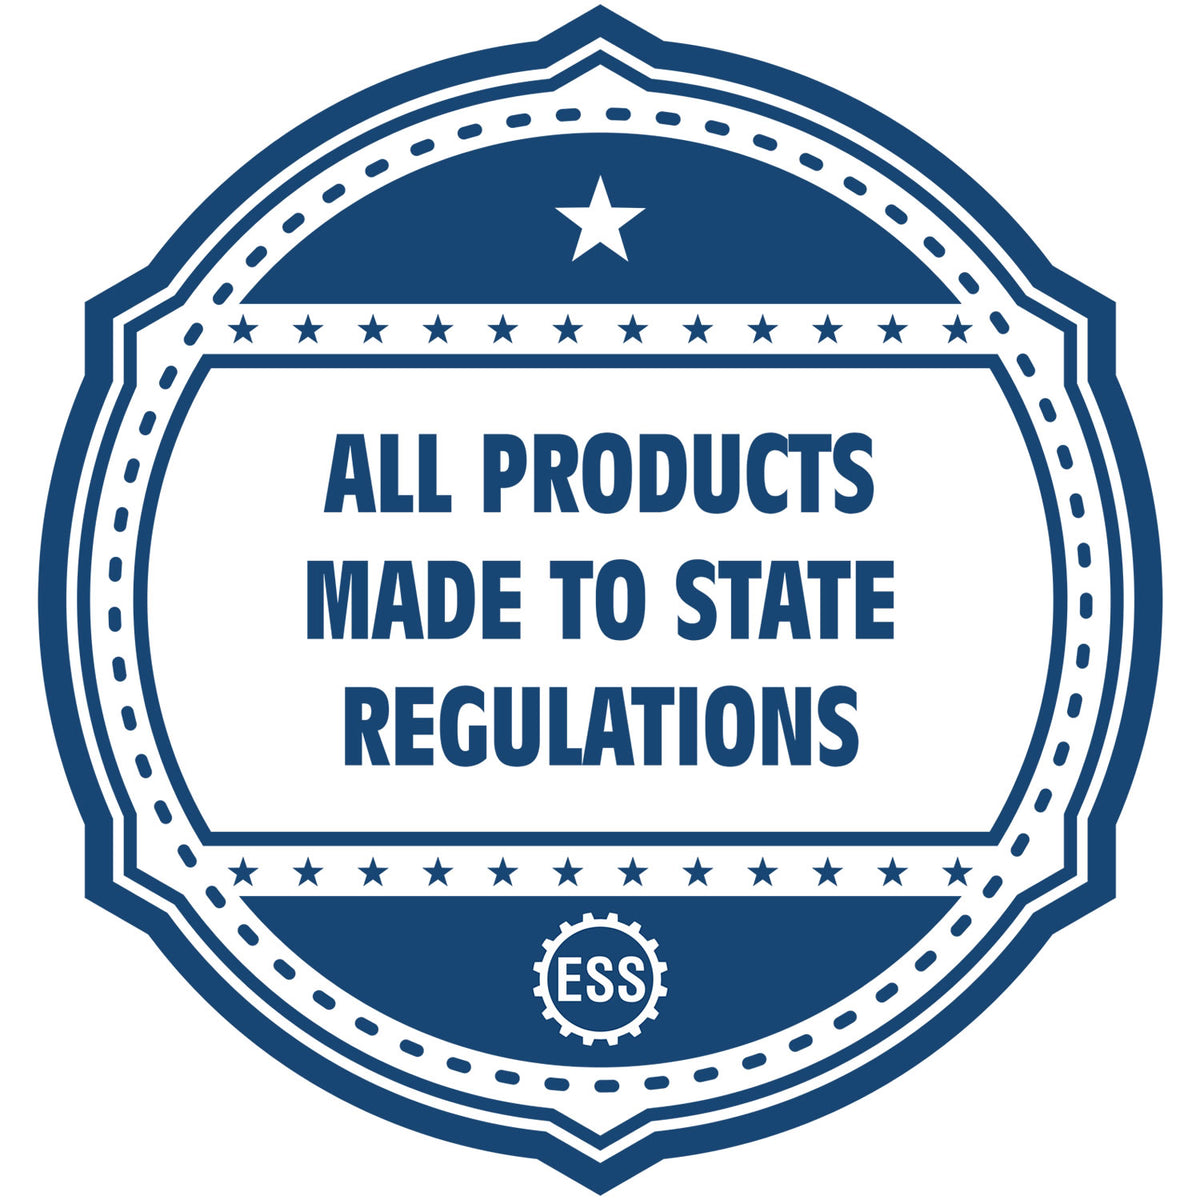 An icon or badge element for the Handheld Louisiana Architect Seal Embosser showing that this product is made in compliance with state regulations.